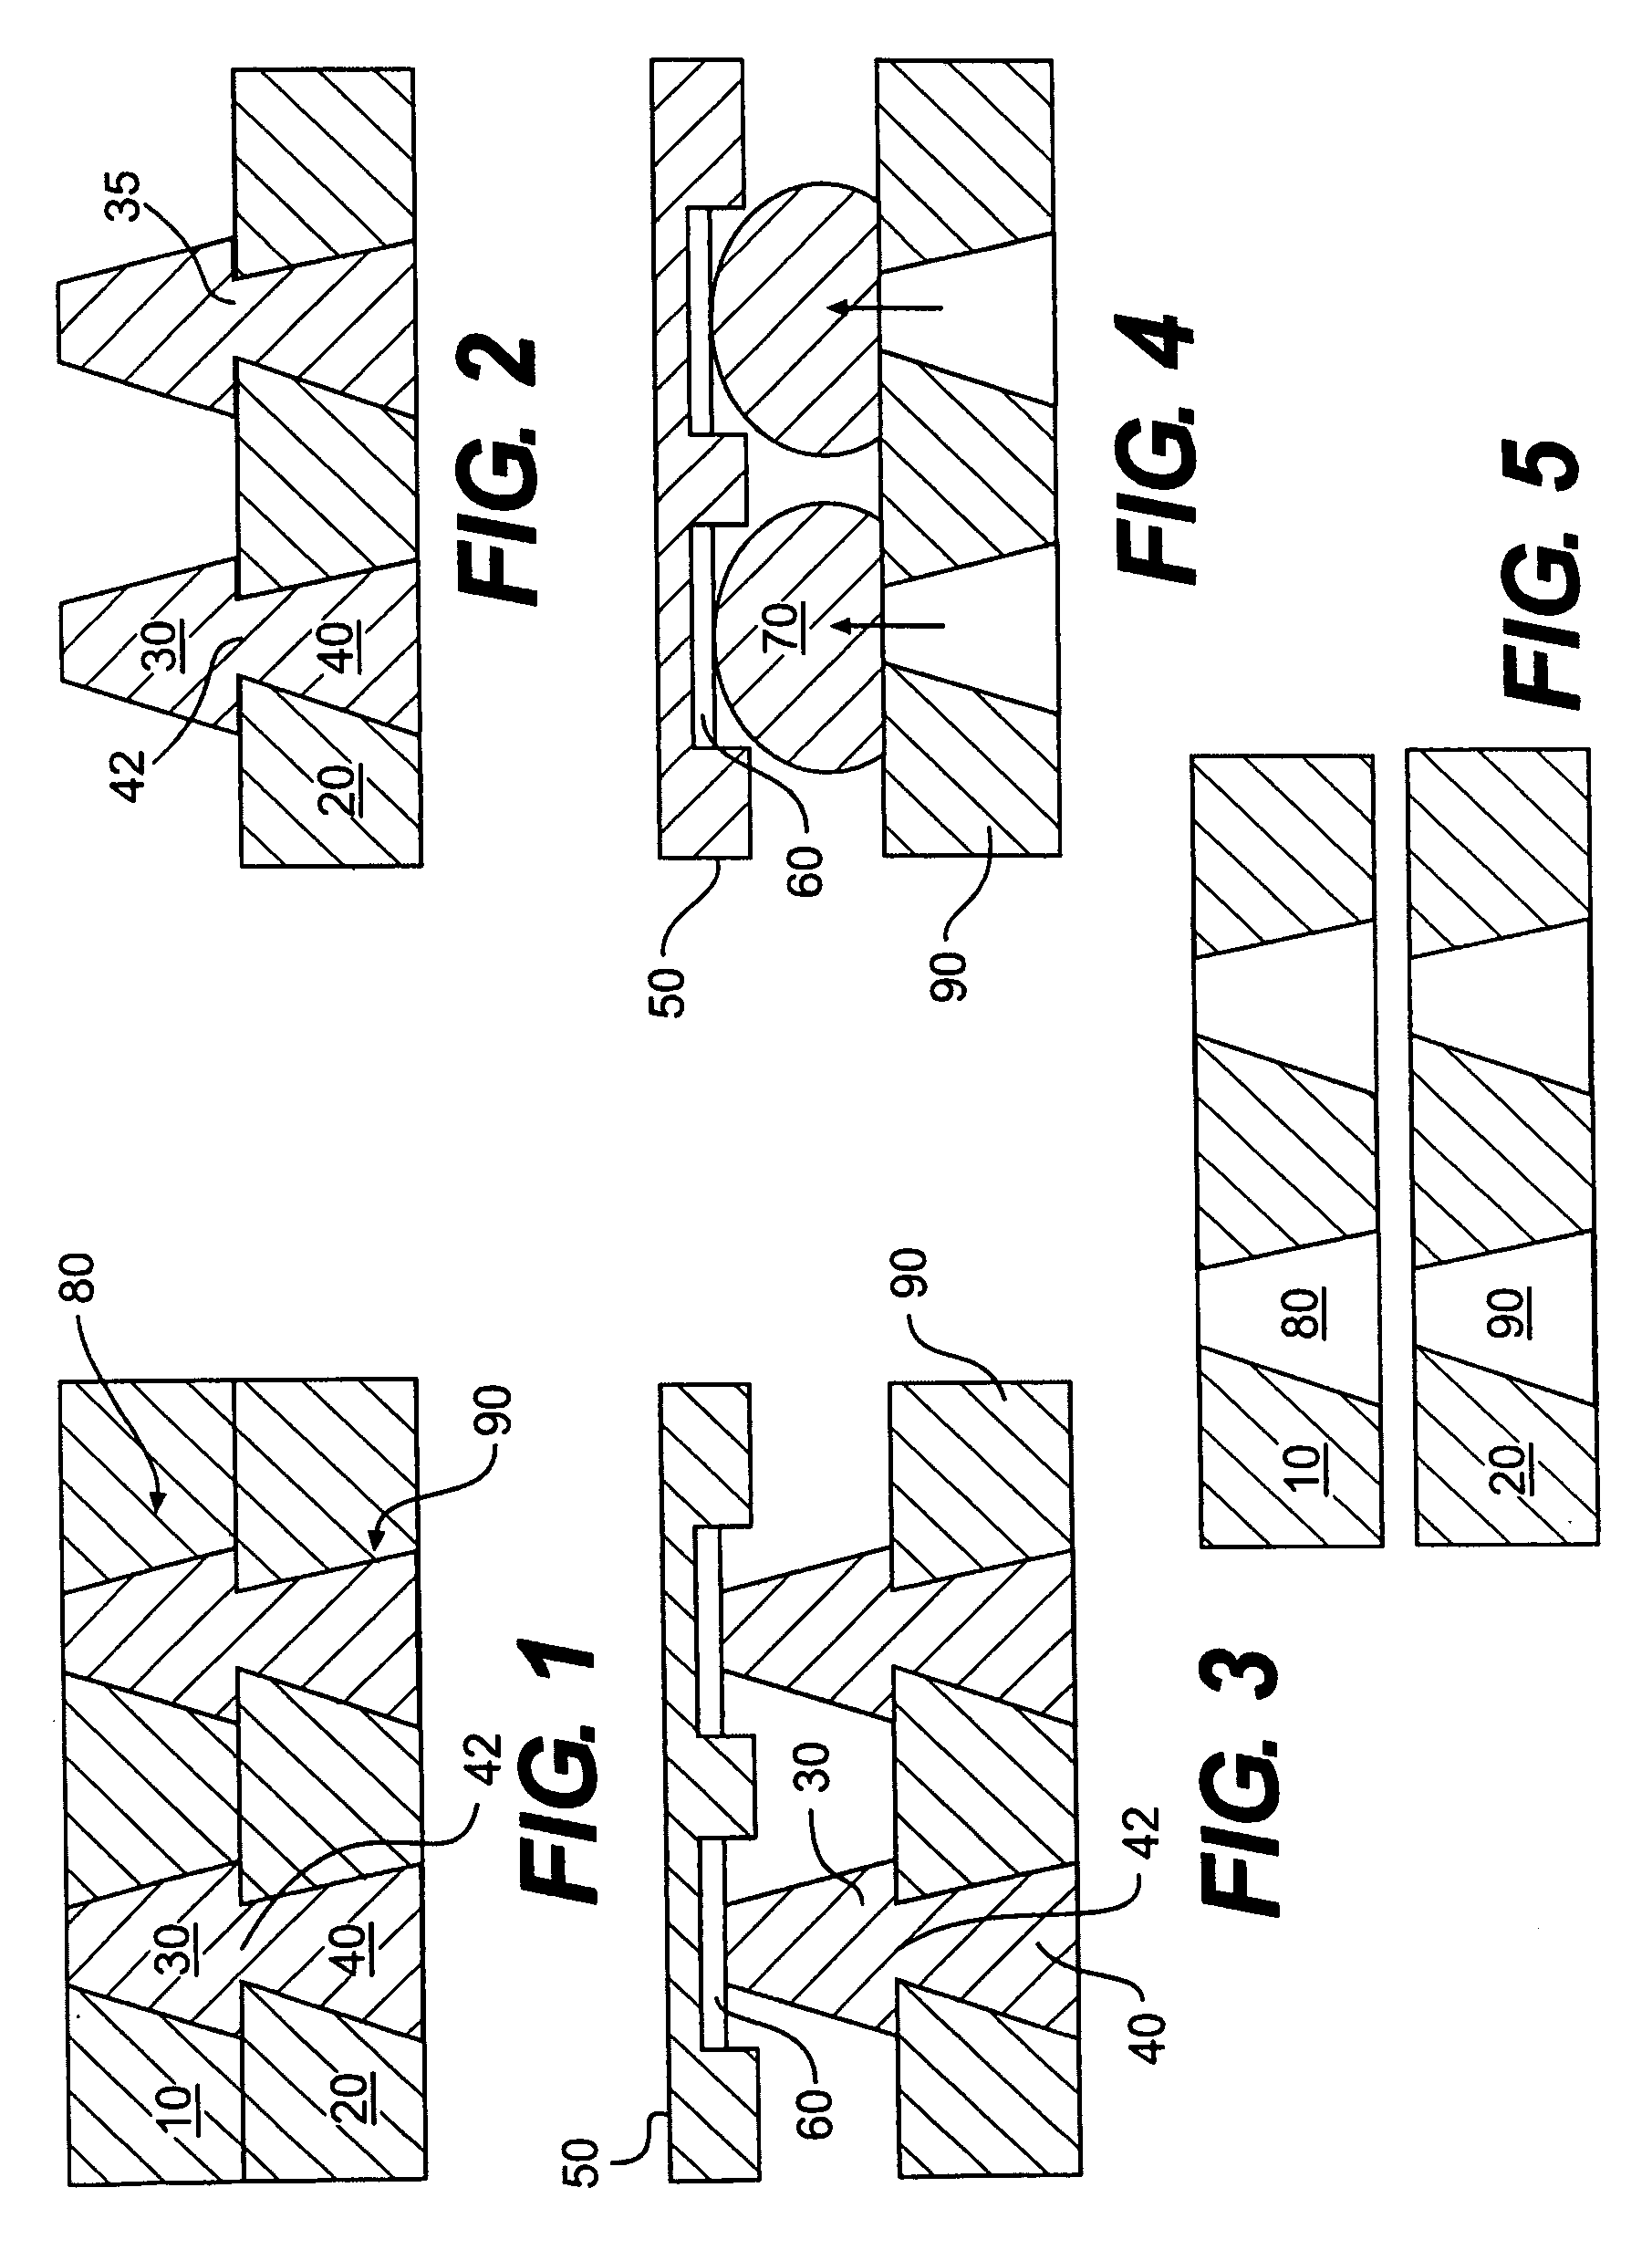 Sprocket opening alignment process and apparatus for multilayer solder decal